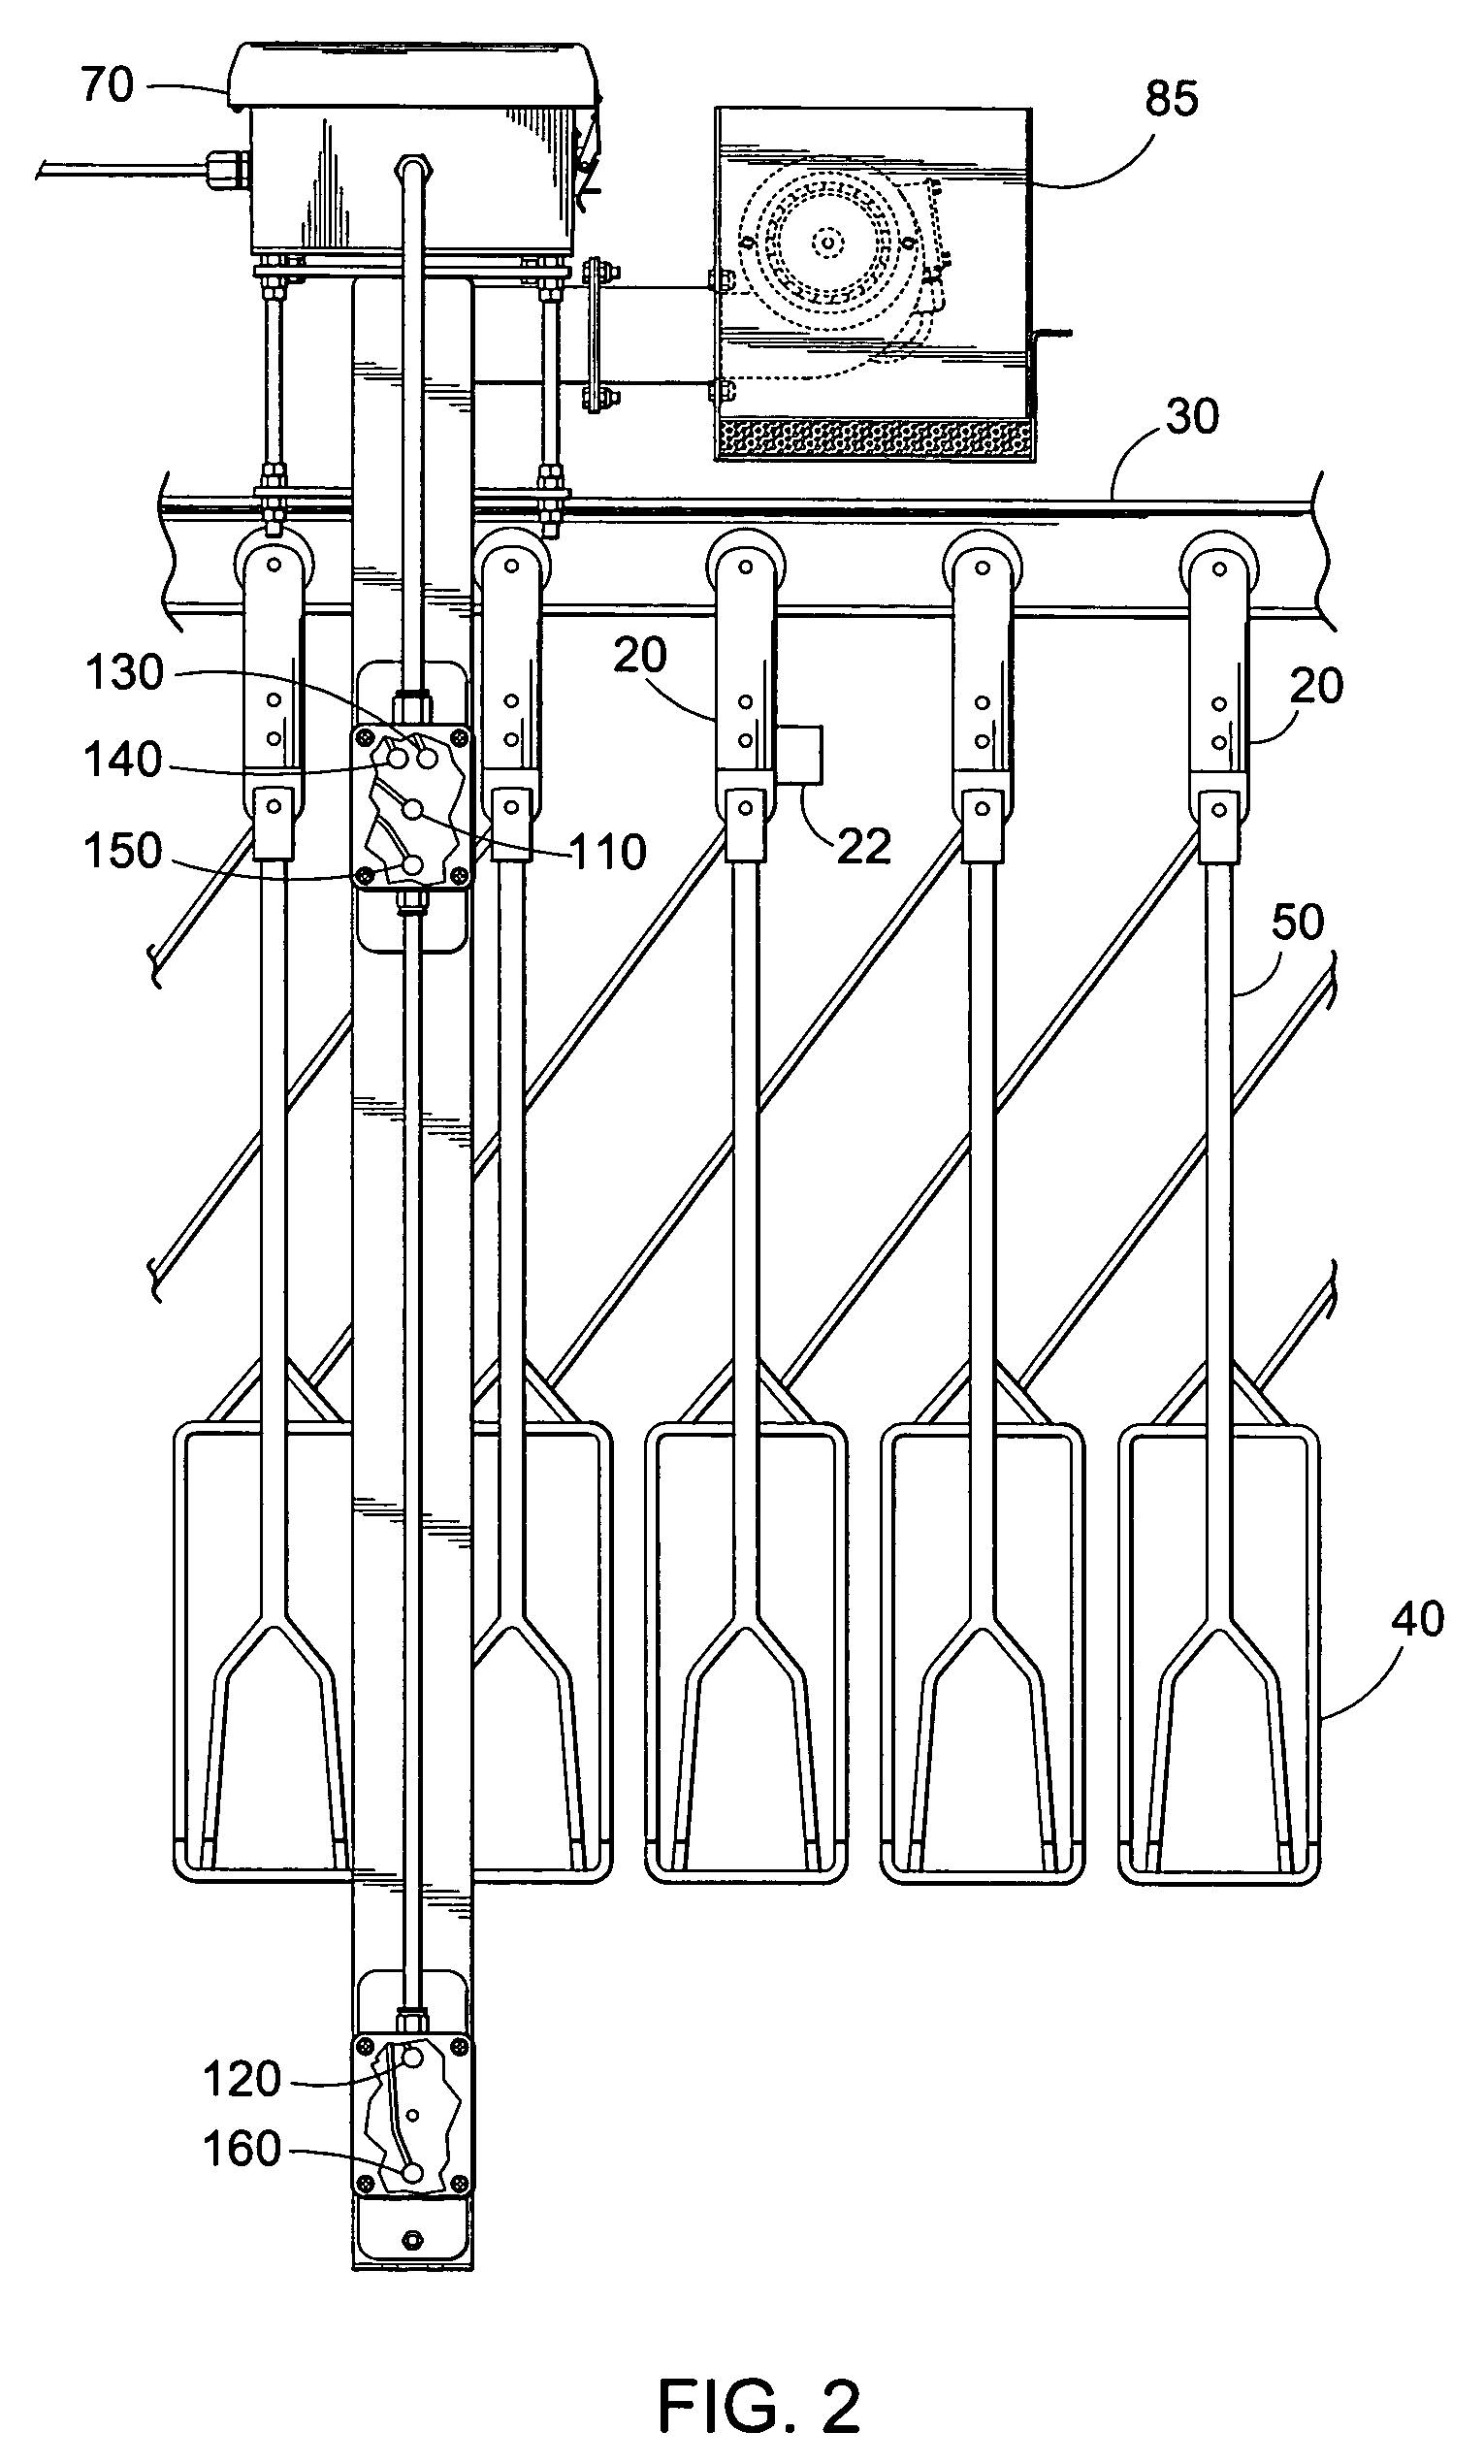 Counting apparatus and method for a poultry processing plant